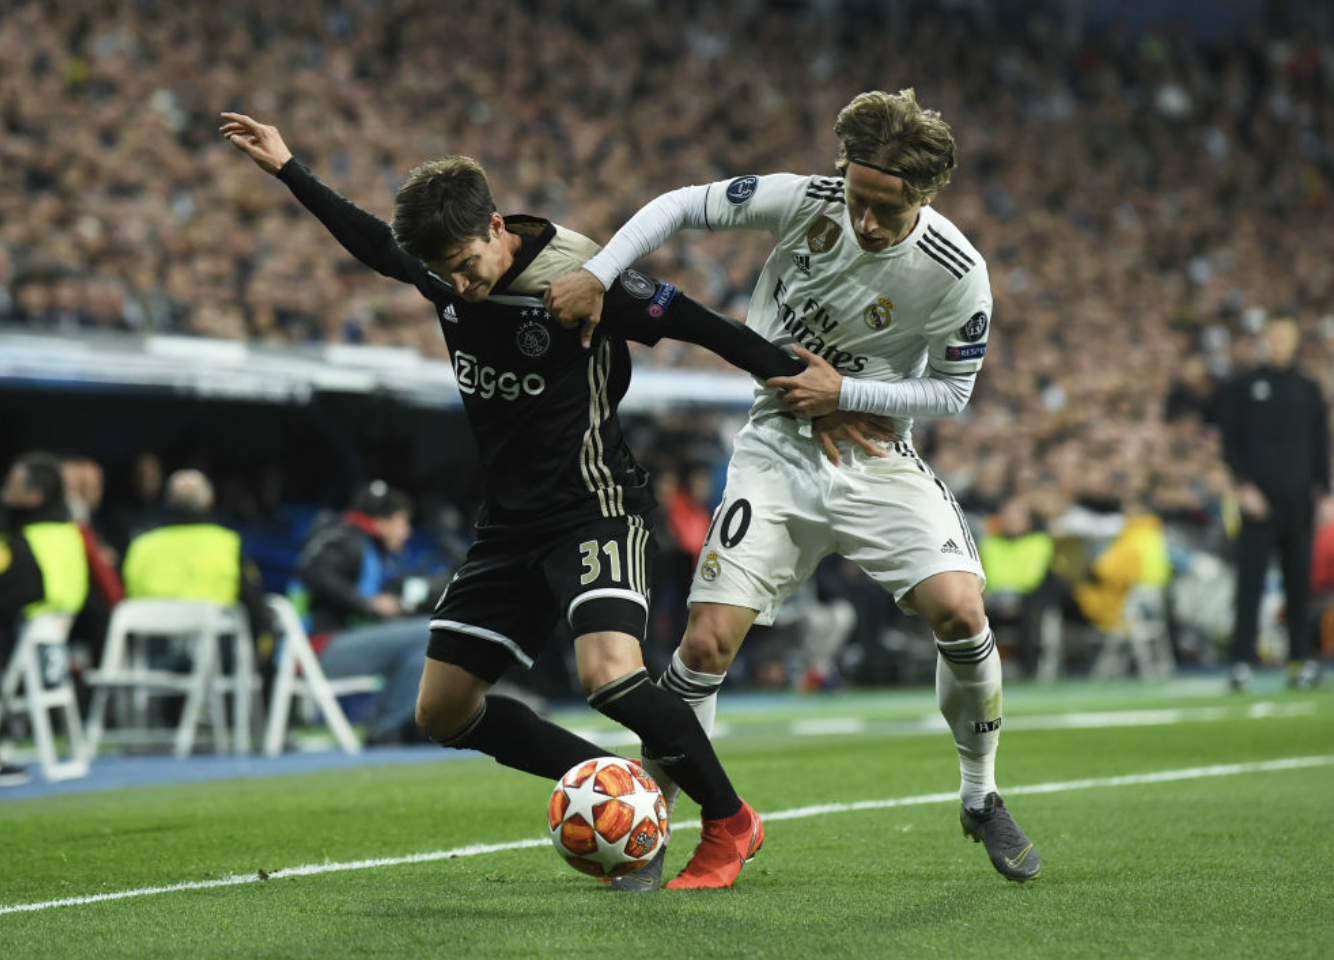 “We’ve made history”, Ajax’s Tagliafico chats to COPE’s El Partidazo after knocking Real Madrid out of the Champions League